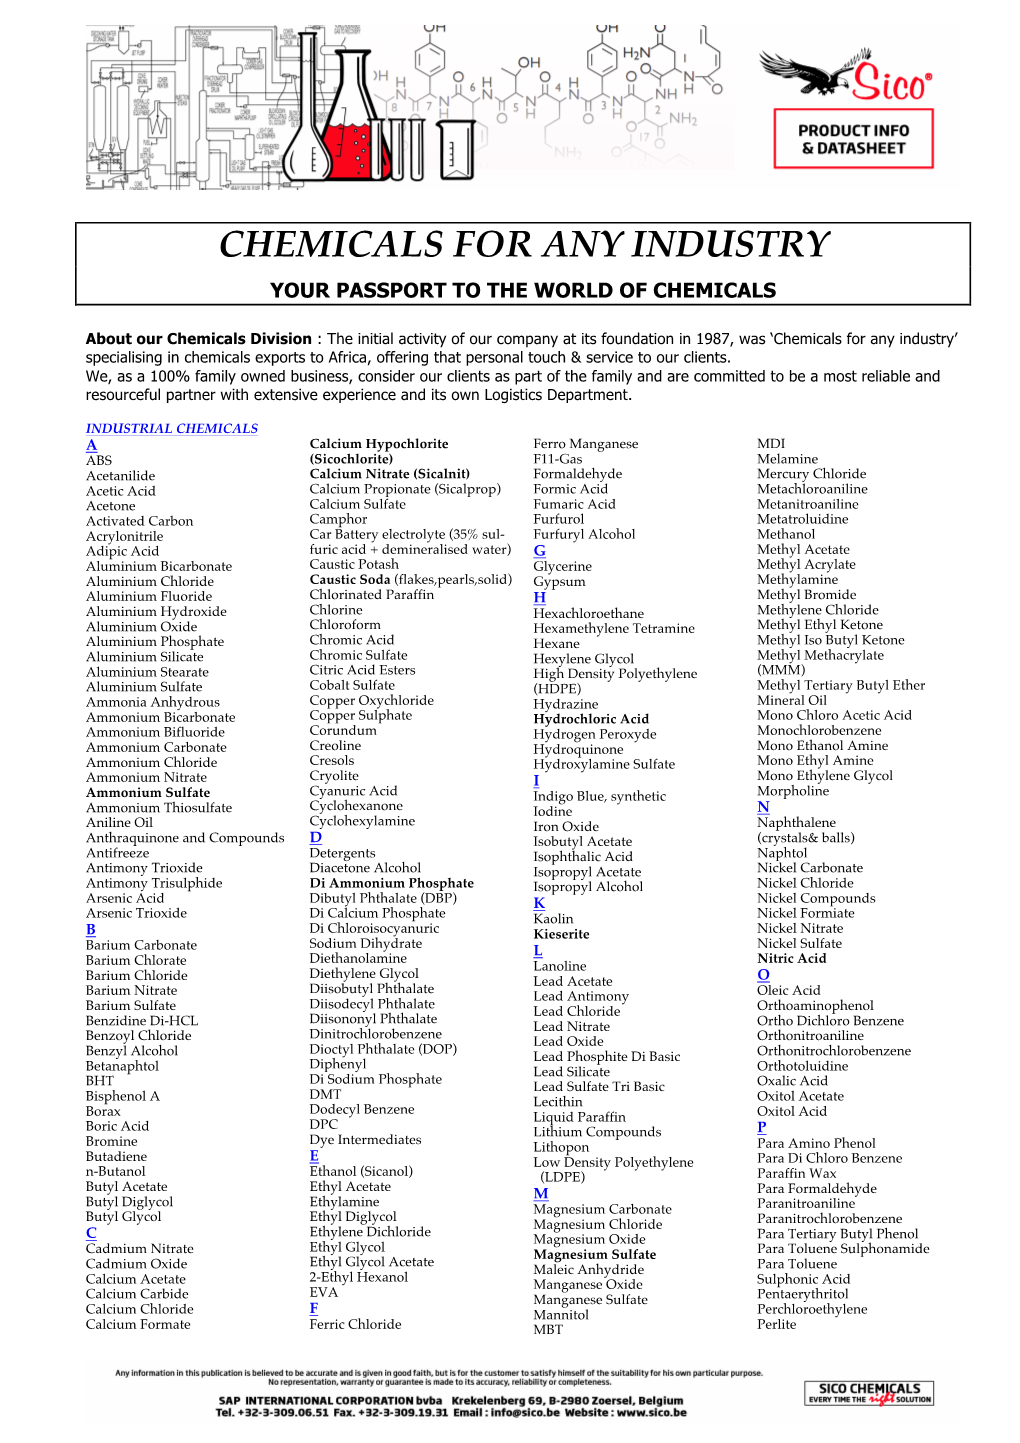 Chemicals for Any Industry Your Passport to the World of Chemicals